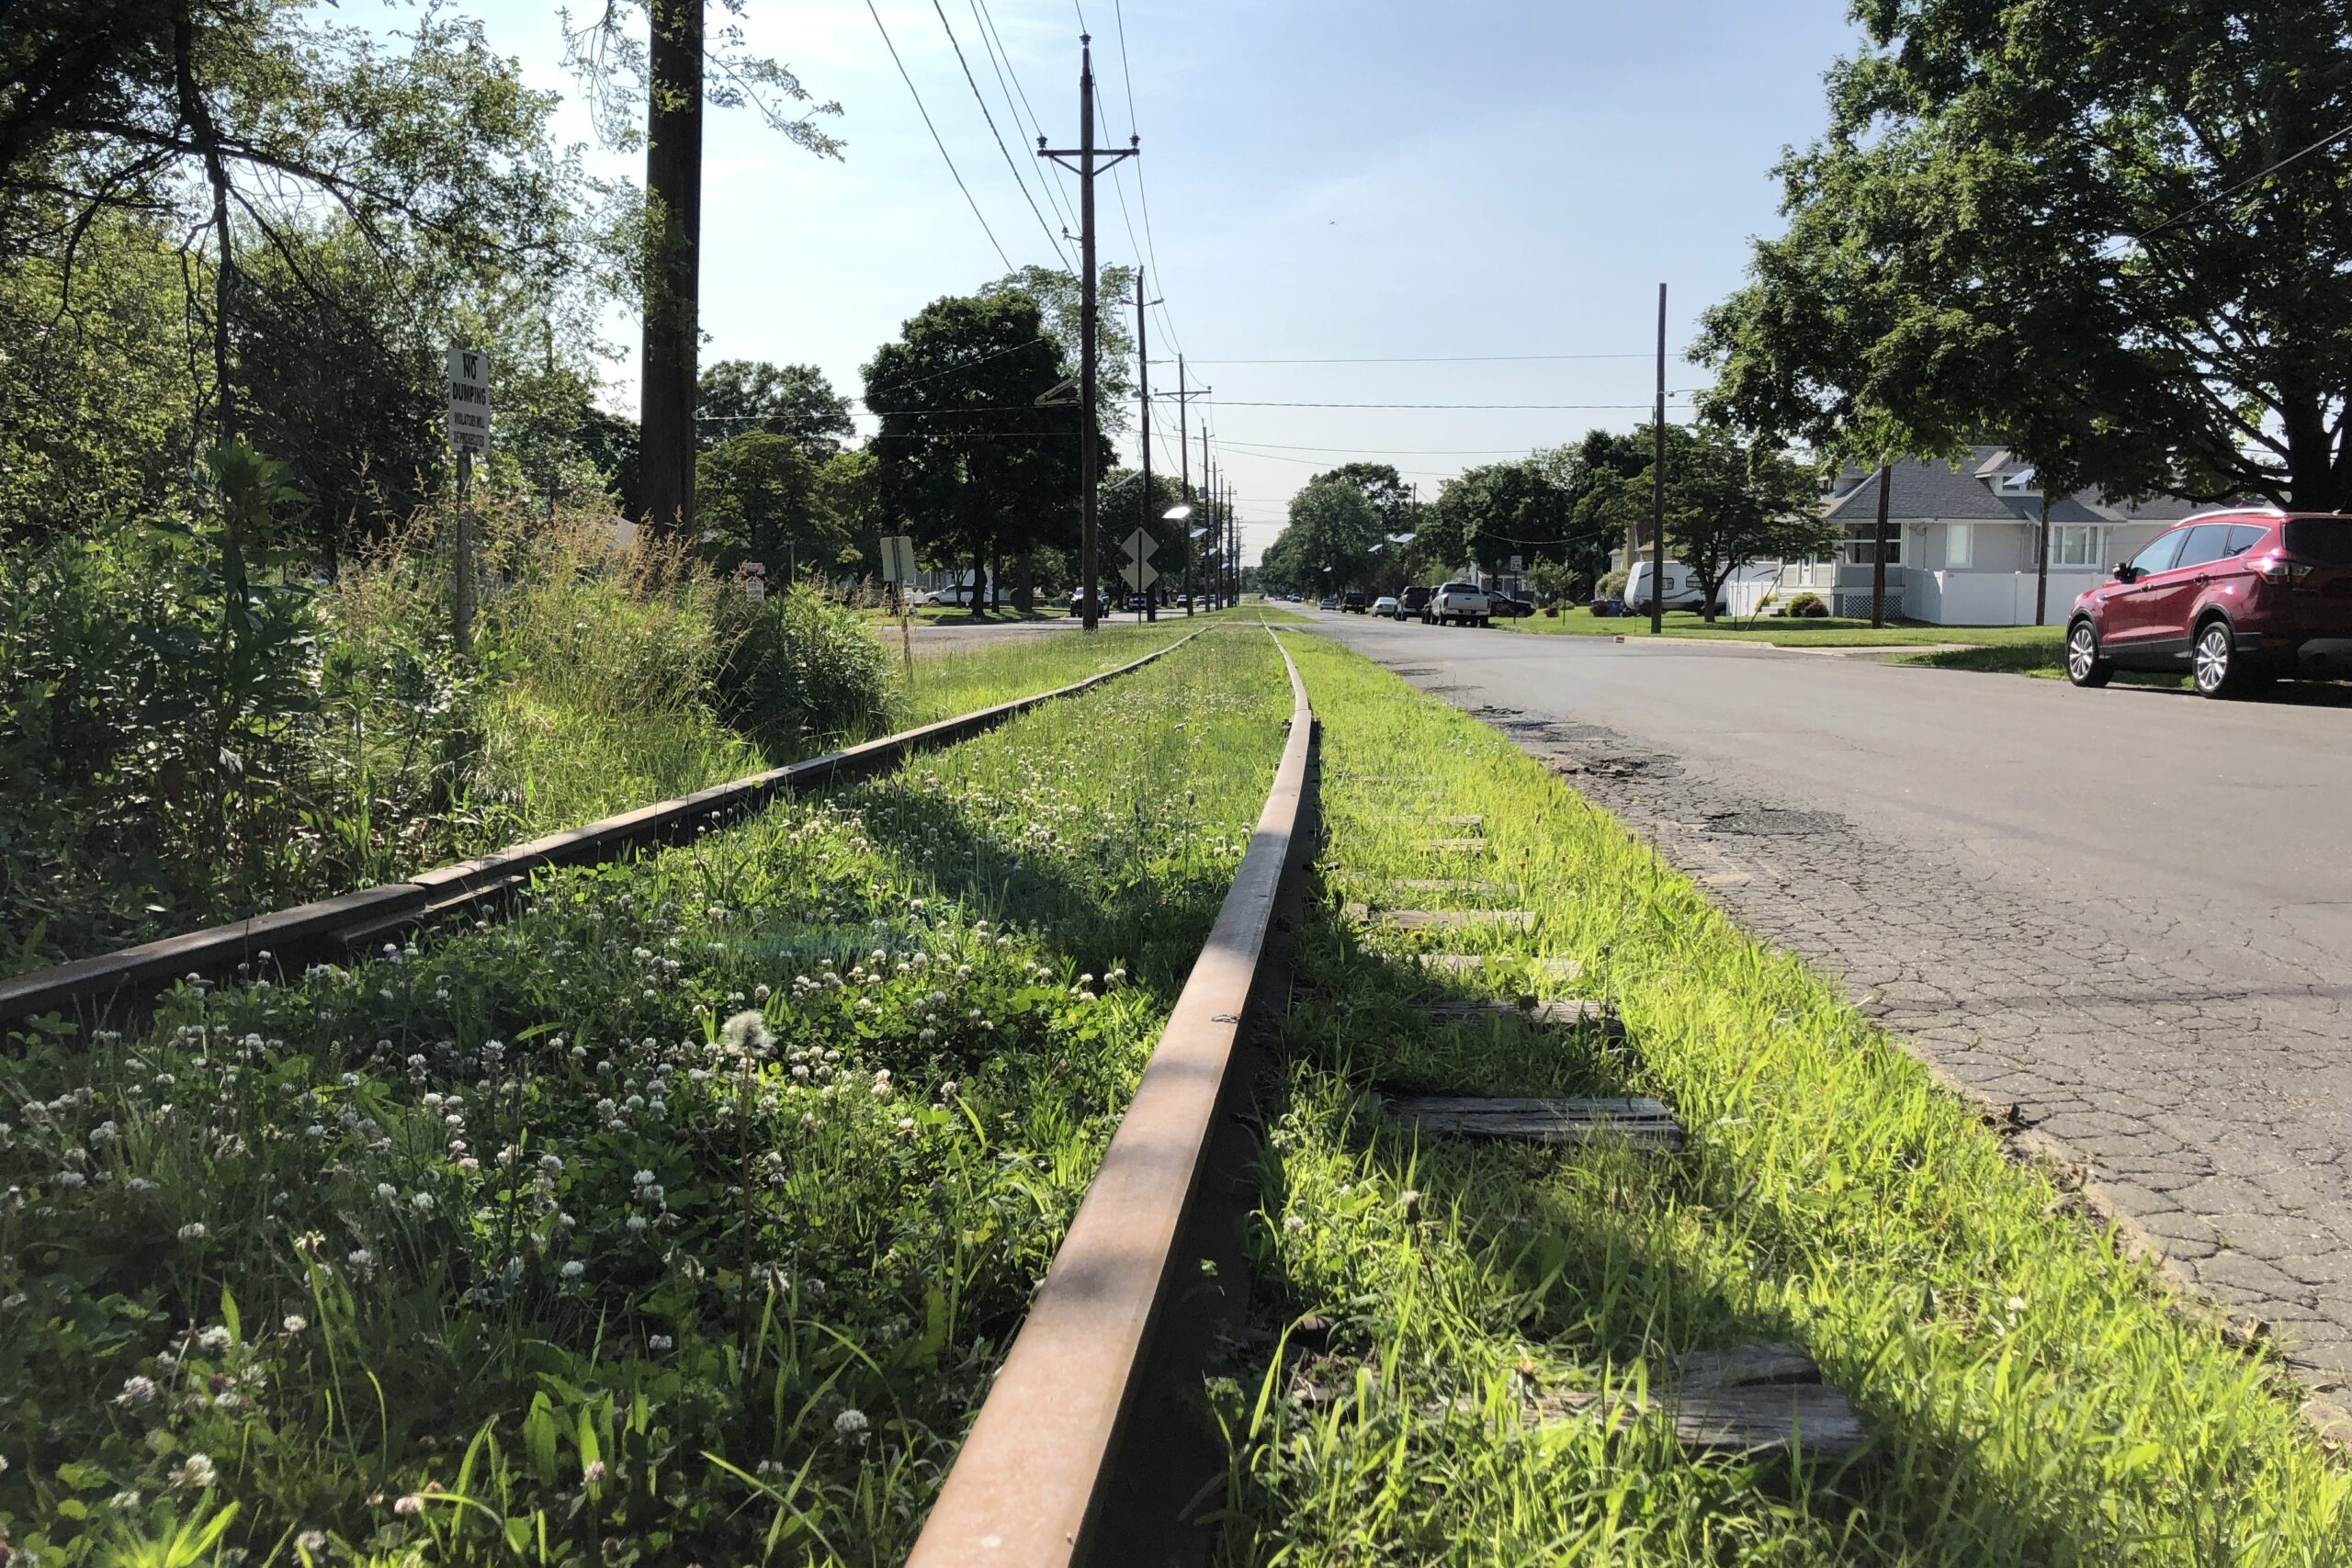 Delving Deeper - Transforming Abandoned Tracks into Recreational Paths